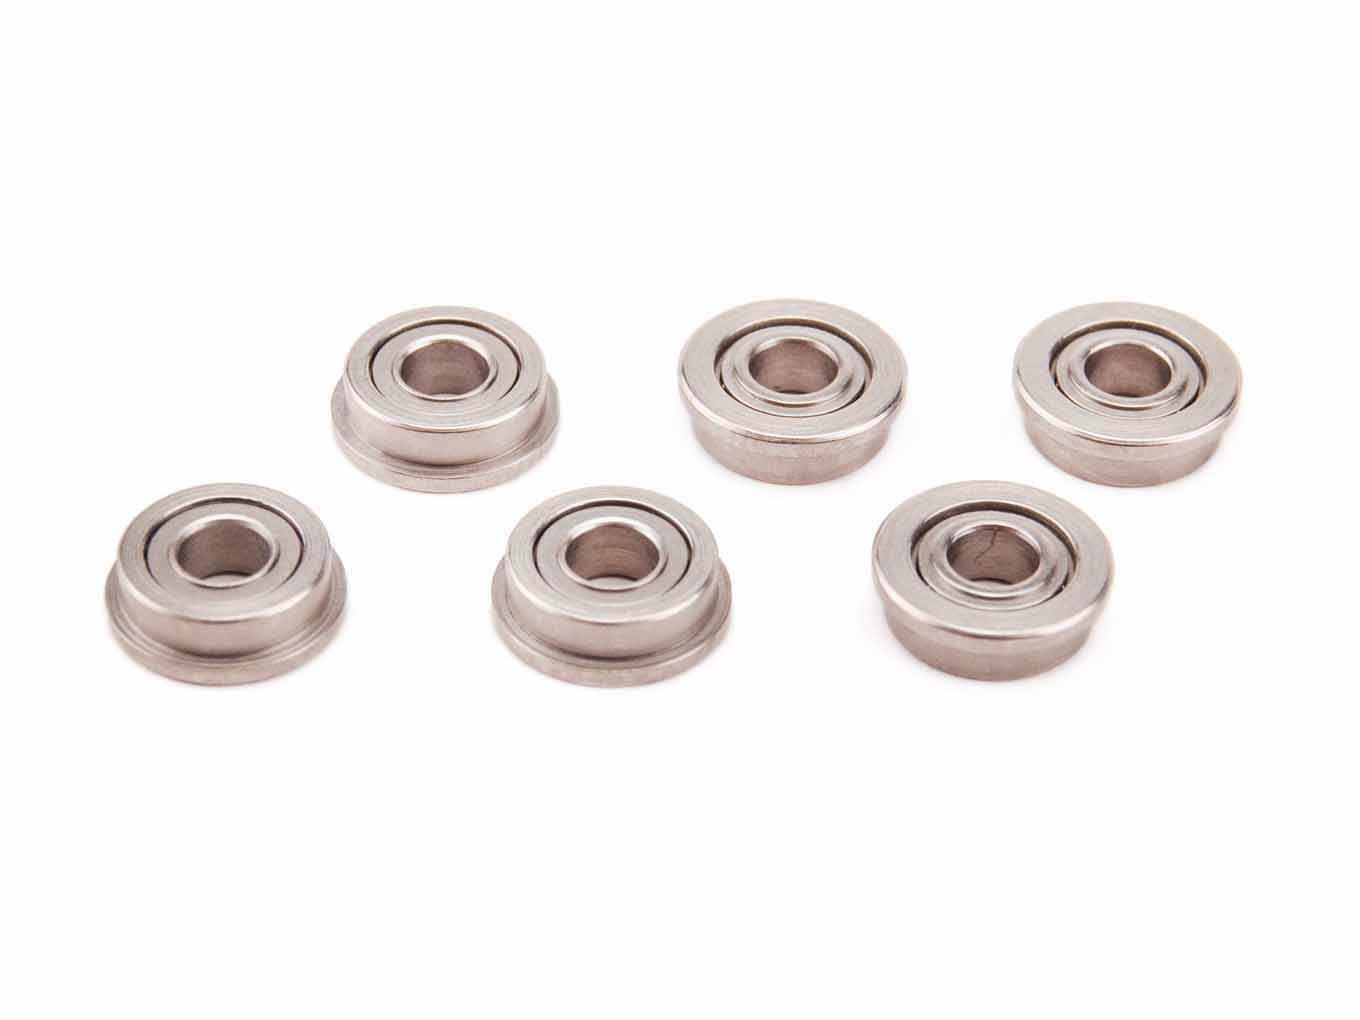 AOLS Ball Bearing 7mm for AEG Gearbox 6PCS